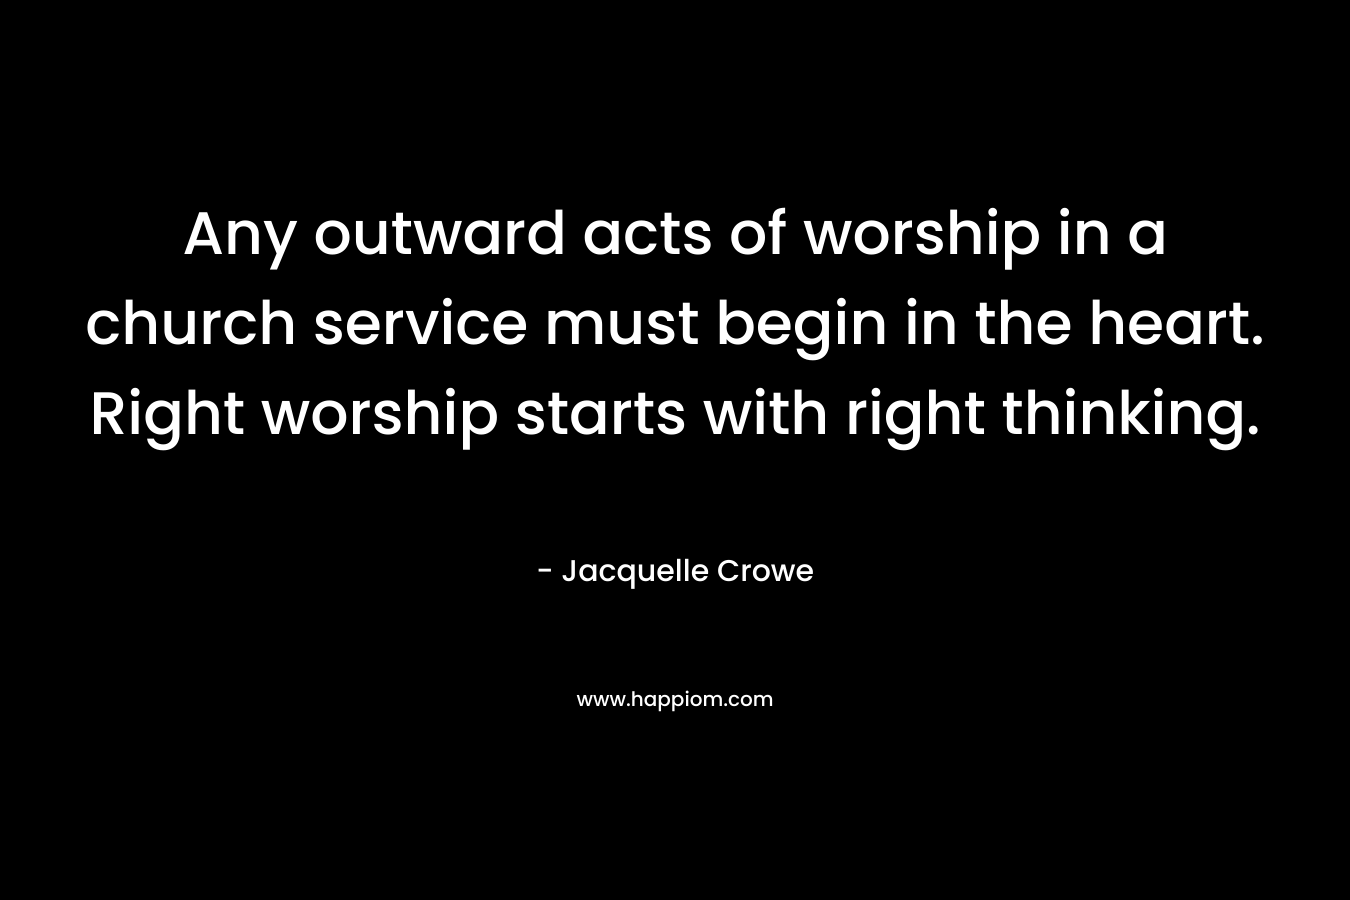 Any outward acts of worship in a church service must begin in the heart. Right worship starts with right thinking.